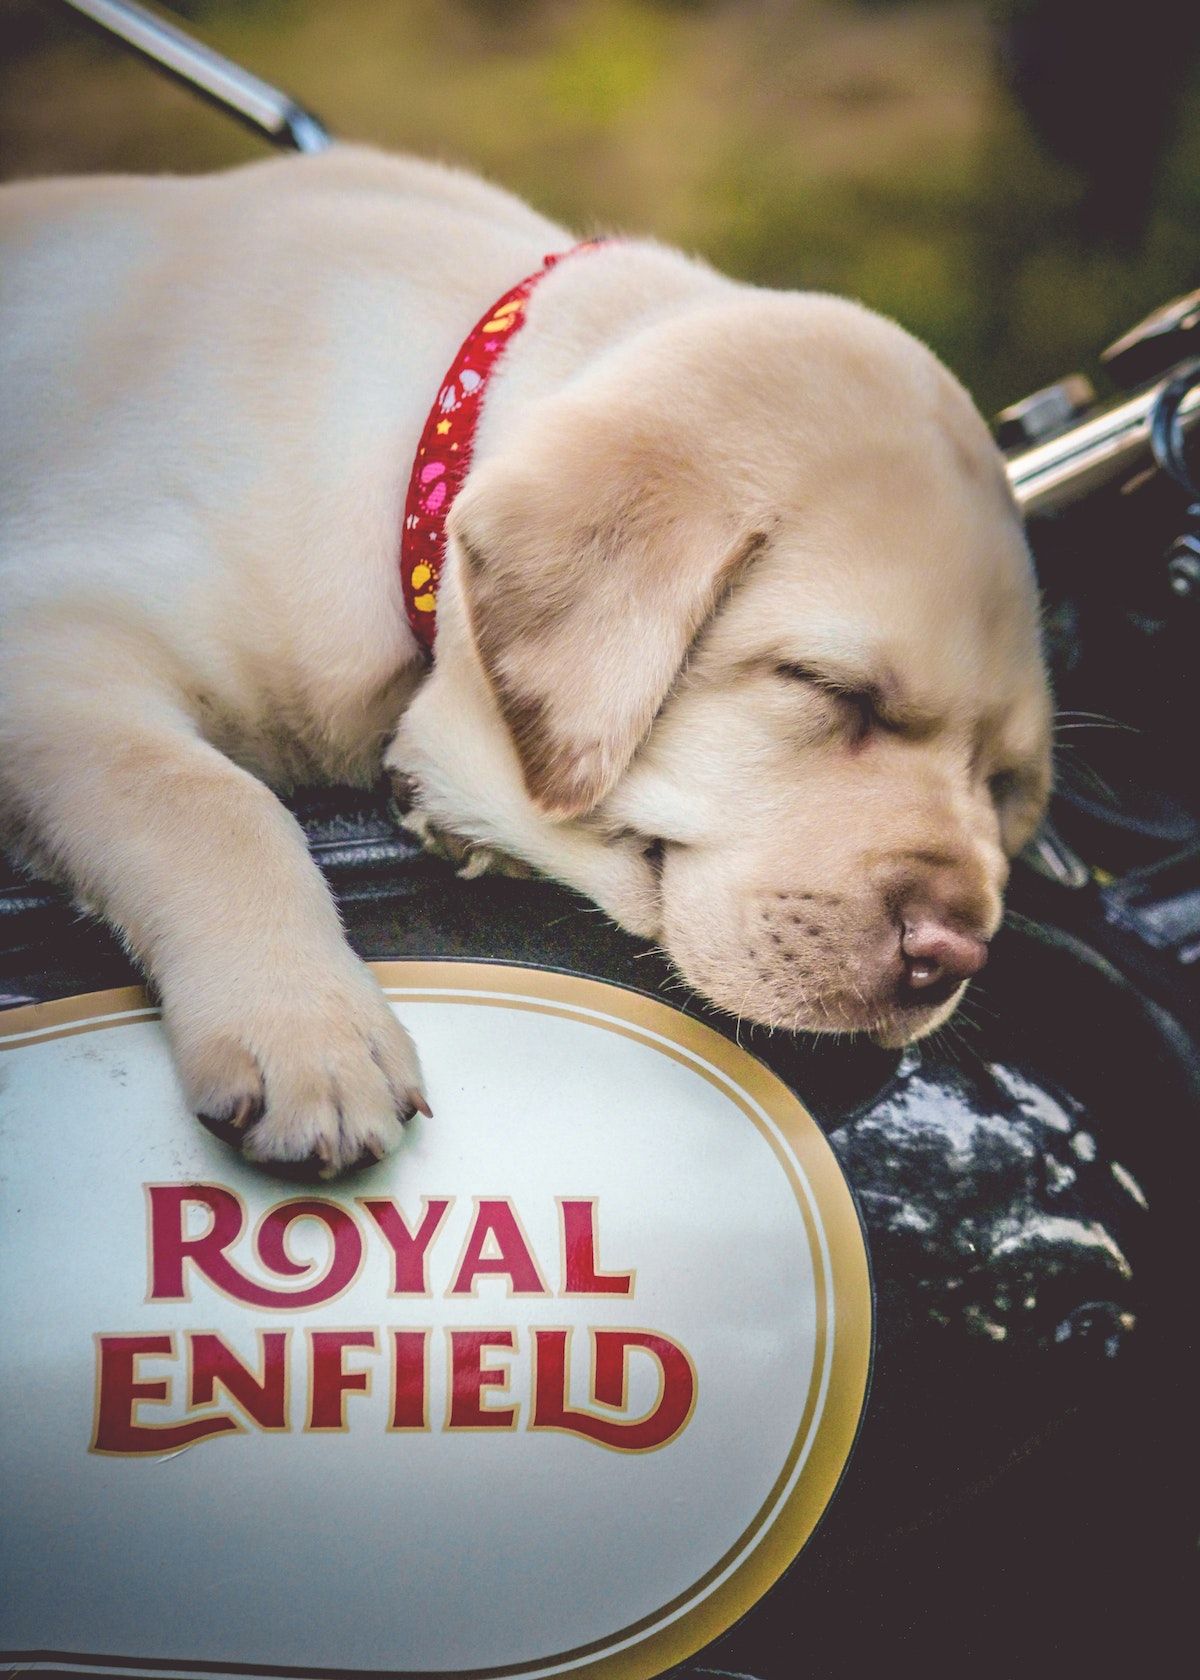 Prepare dog for safe motorcycle ride